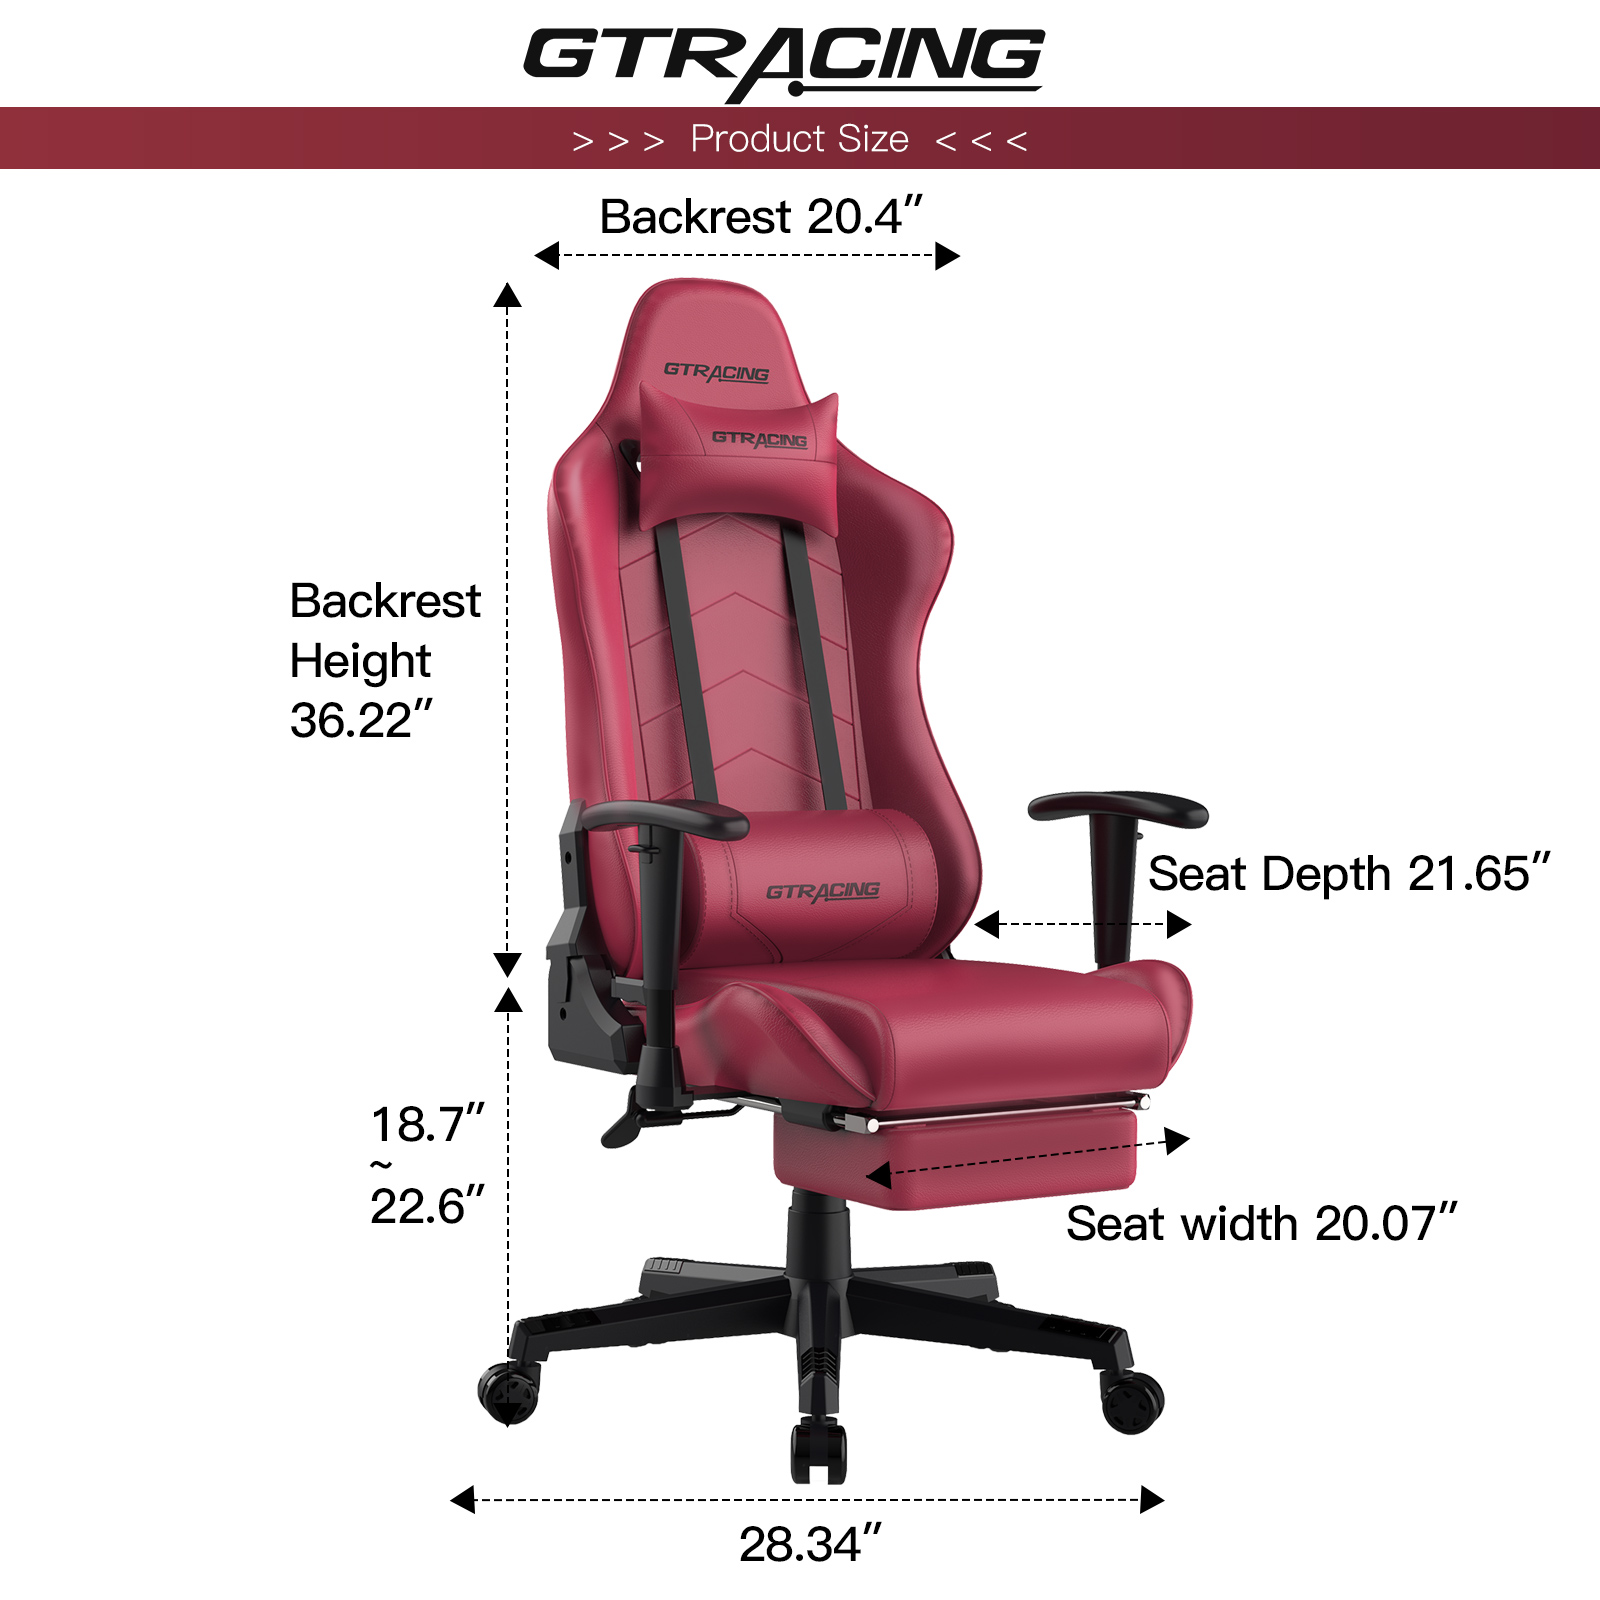 GTRACING Gaming Chair with Footrest Ergonomic Reclining Leather Chair, Dark Red - image 4 of 6